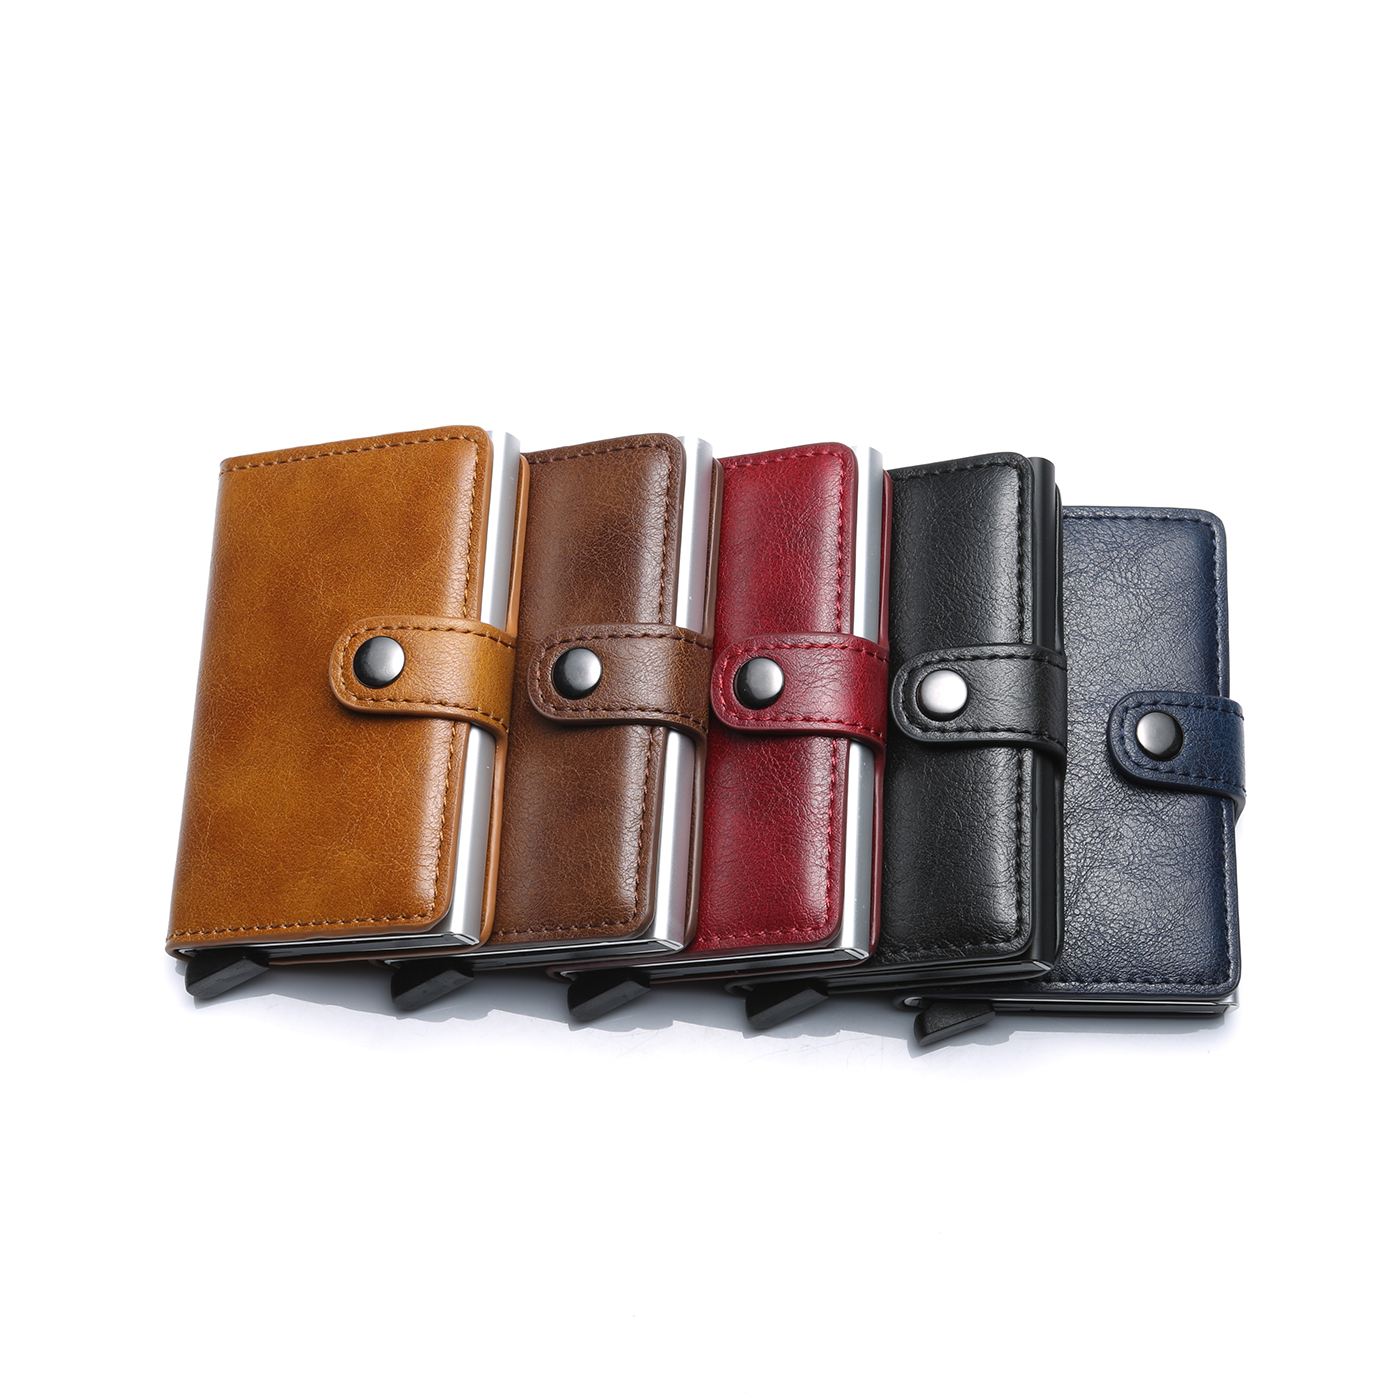 2020 new design rfid block man business card holder leather bifold bank card wallet promotional best gift for husband father